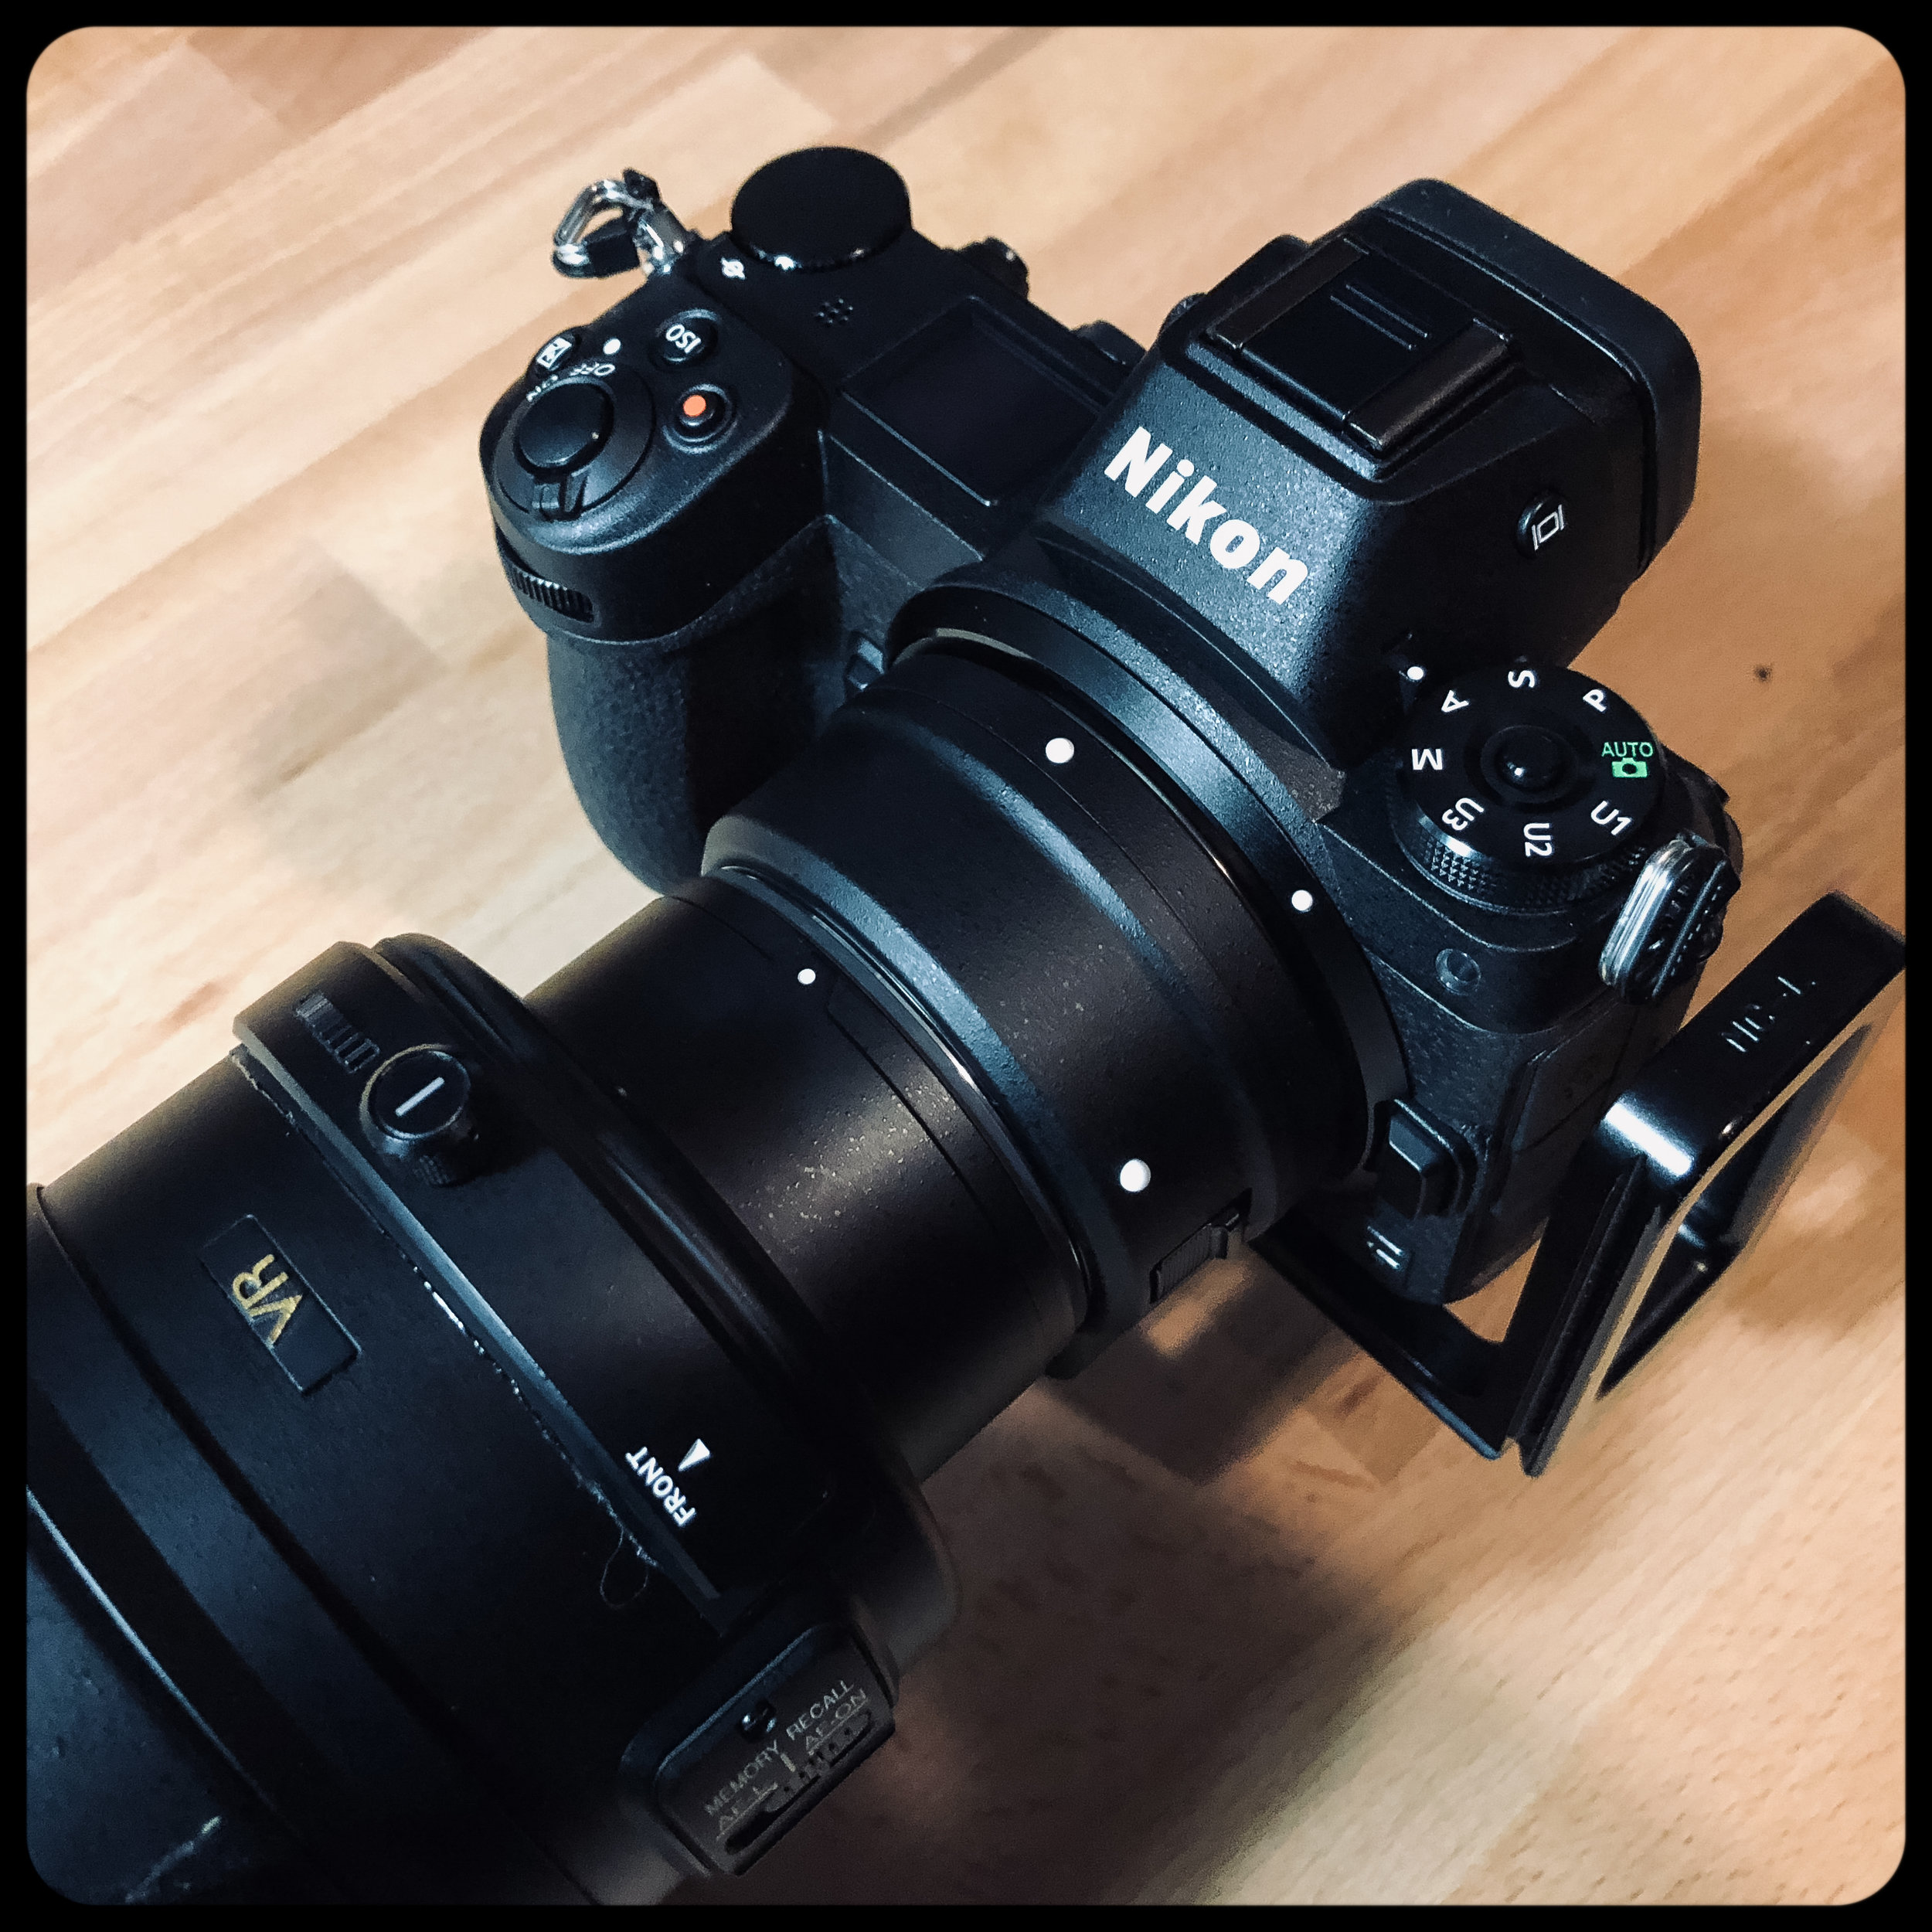 Long term thoughts on the Nikon Z7 and system – Ming Thein